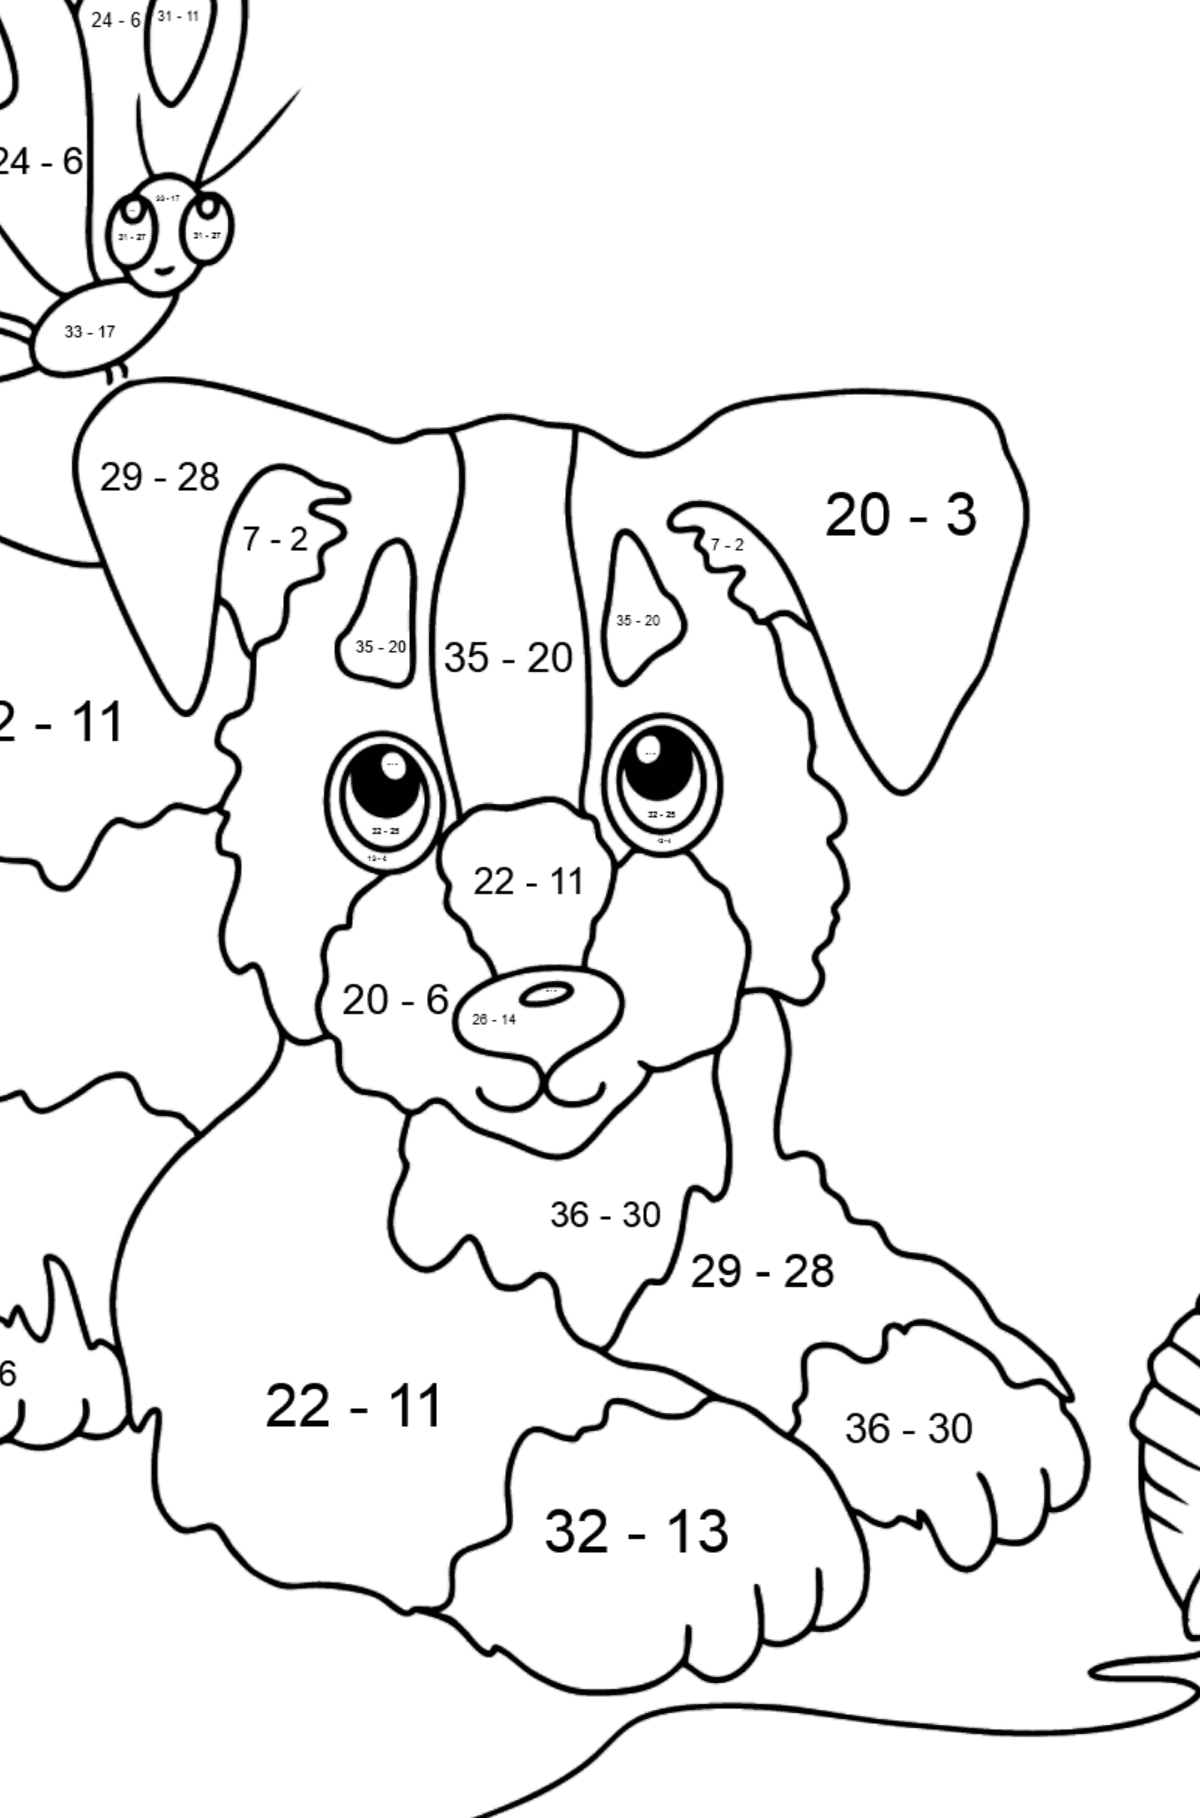 Coloring Page - A Dog is Playing with a Ball of Yarn and Butterflies - Math Coloring - Subtraction for Kids